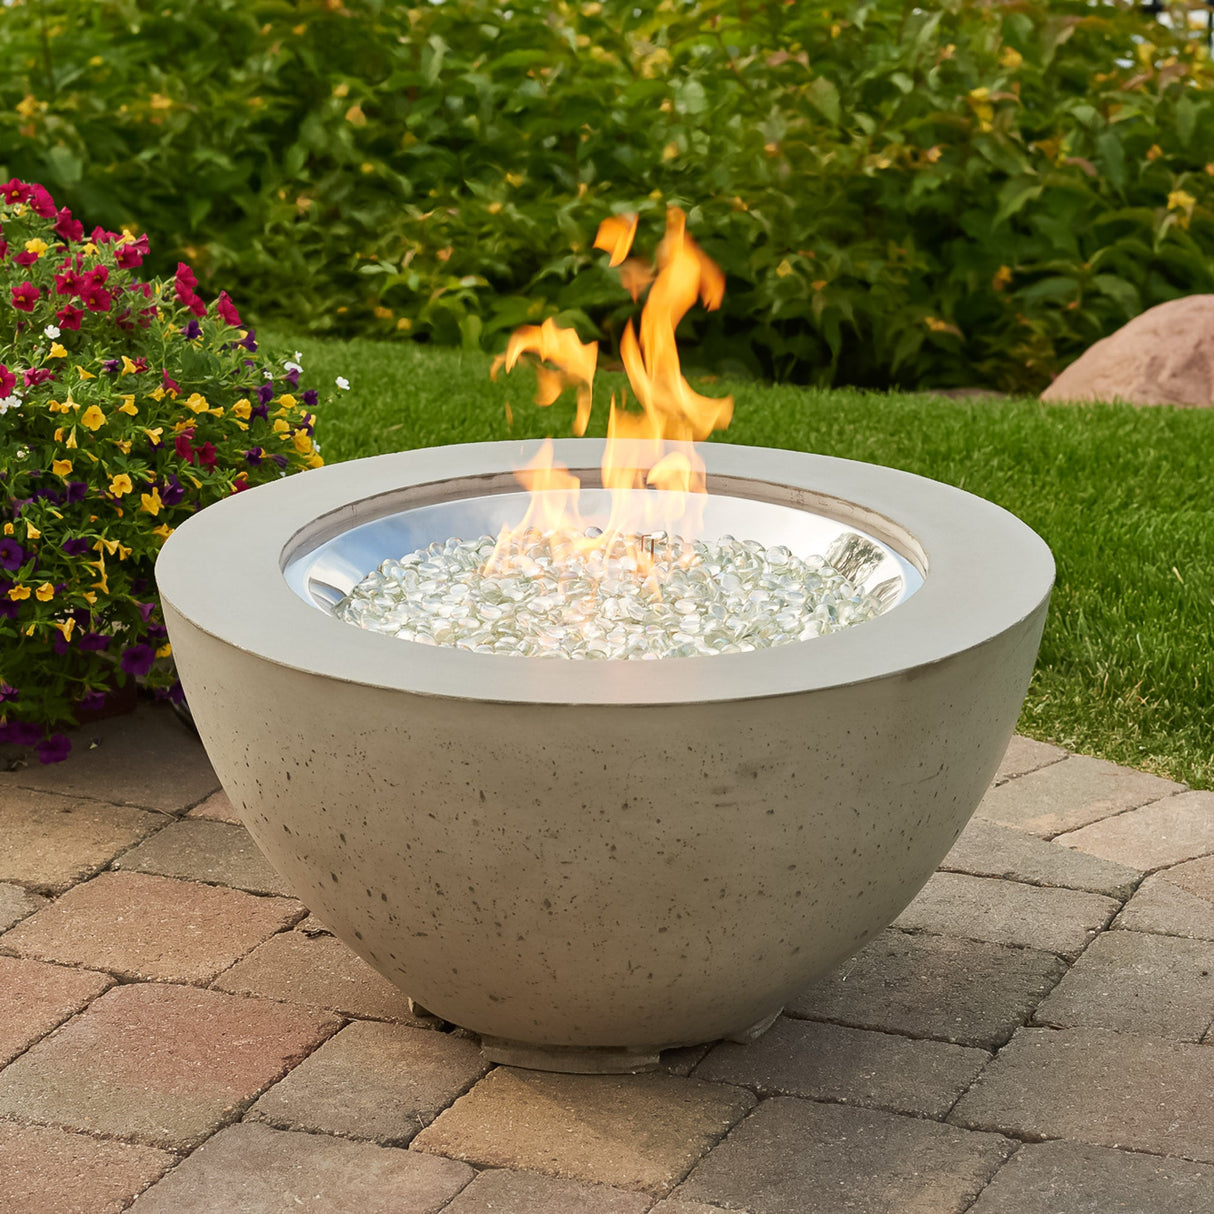 A Cove Round Gas Fire Pit Bowl 29" in a scenic backyard next to flowers